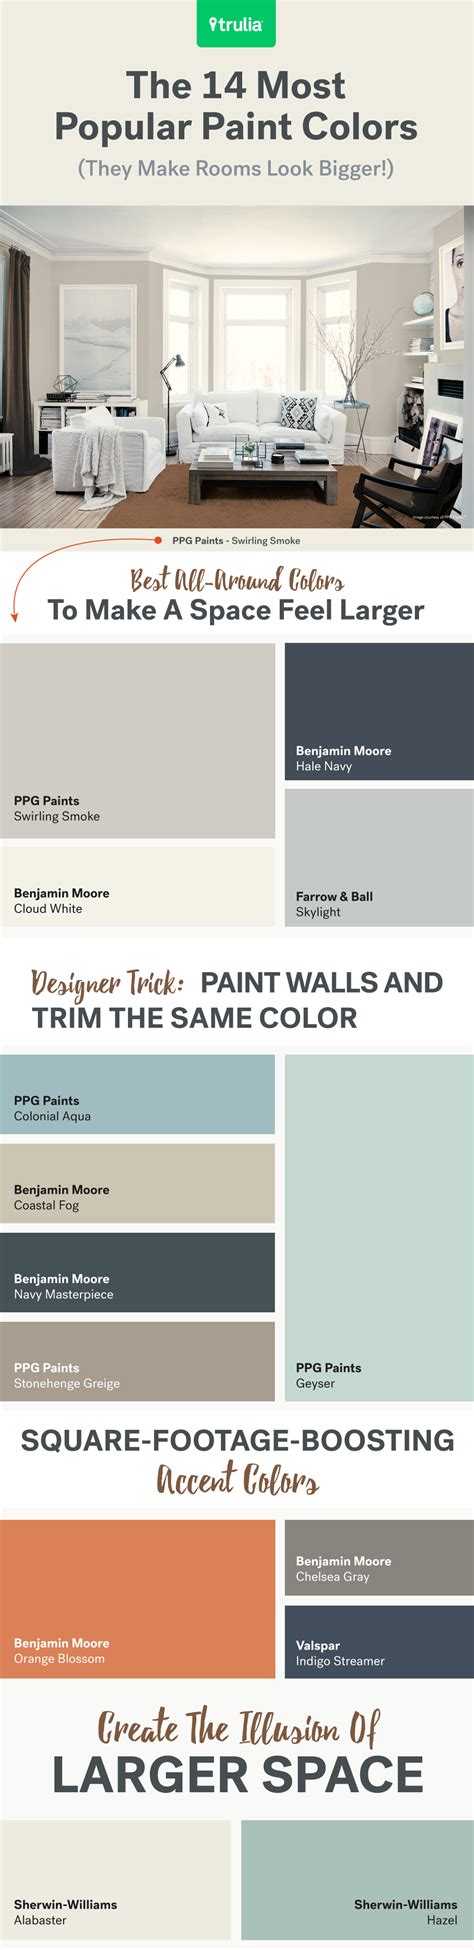 14 Popular Paint Colors For Small Rooms Life At Home Trulia Blog